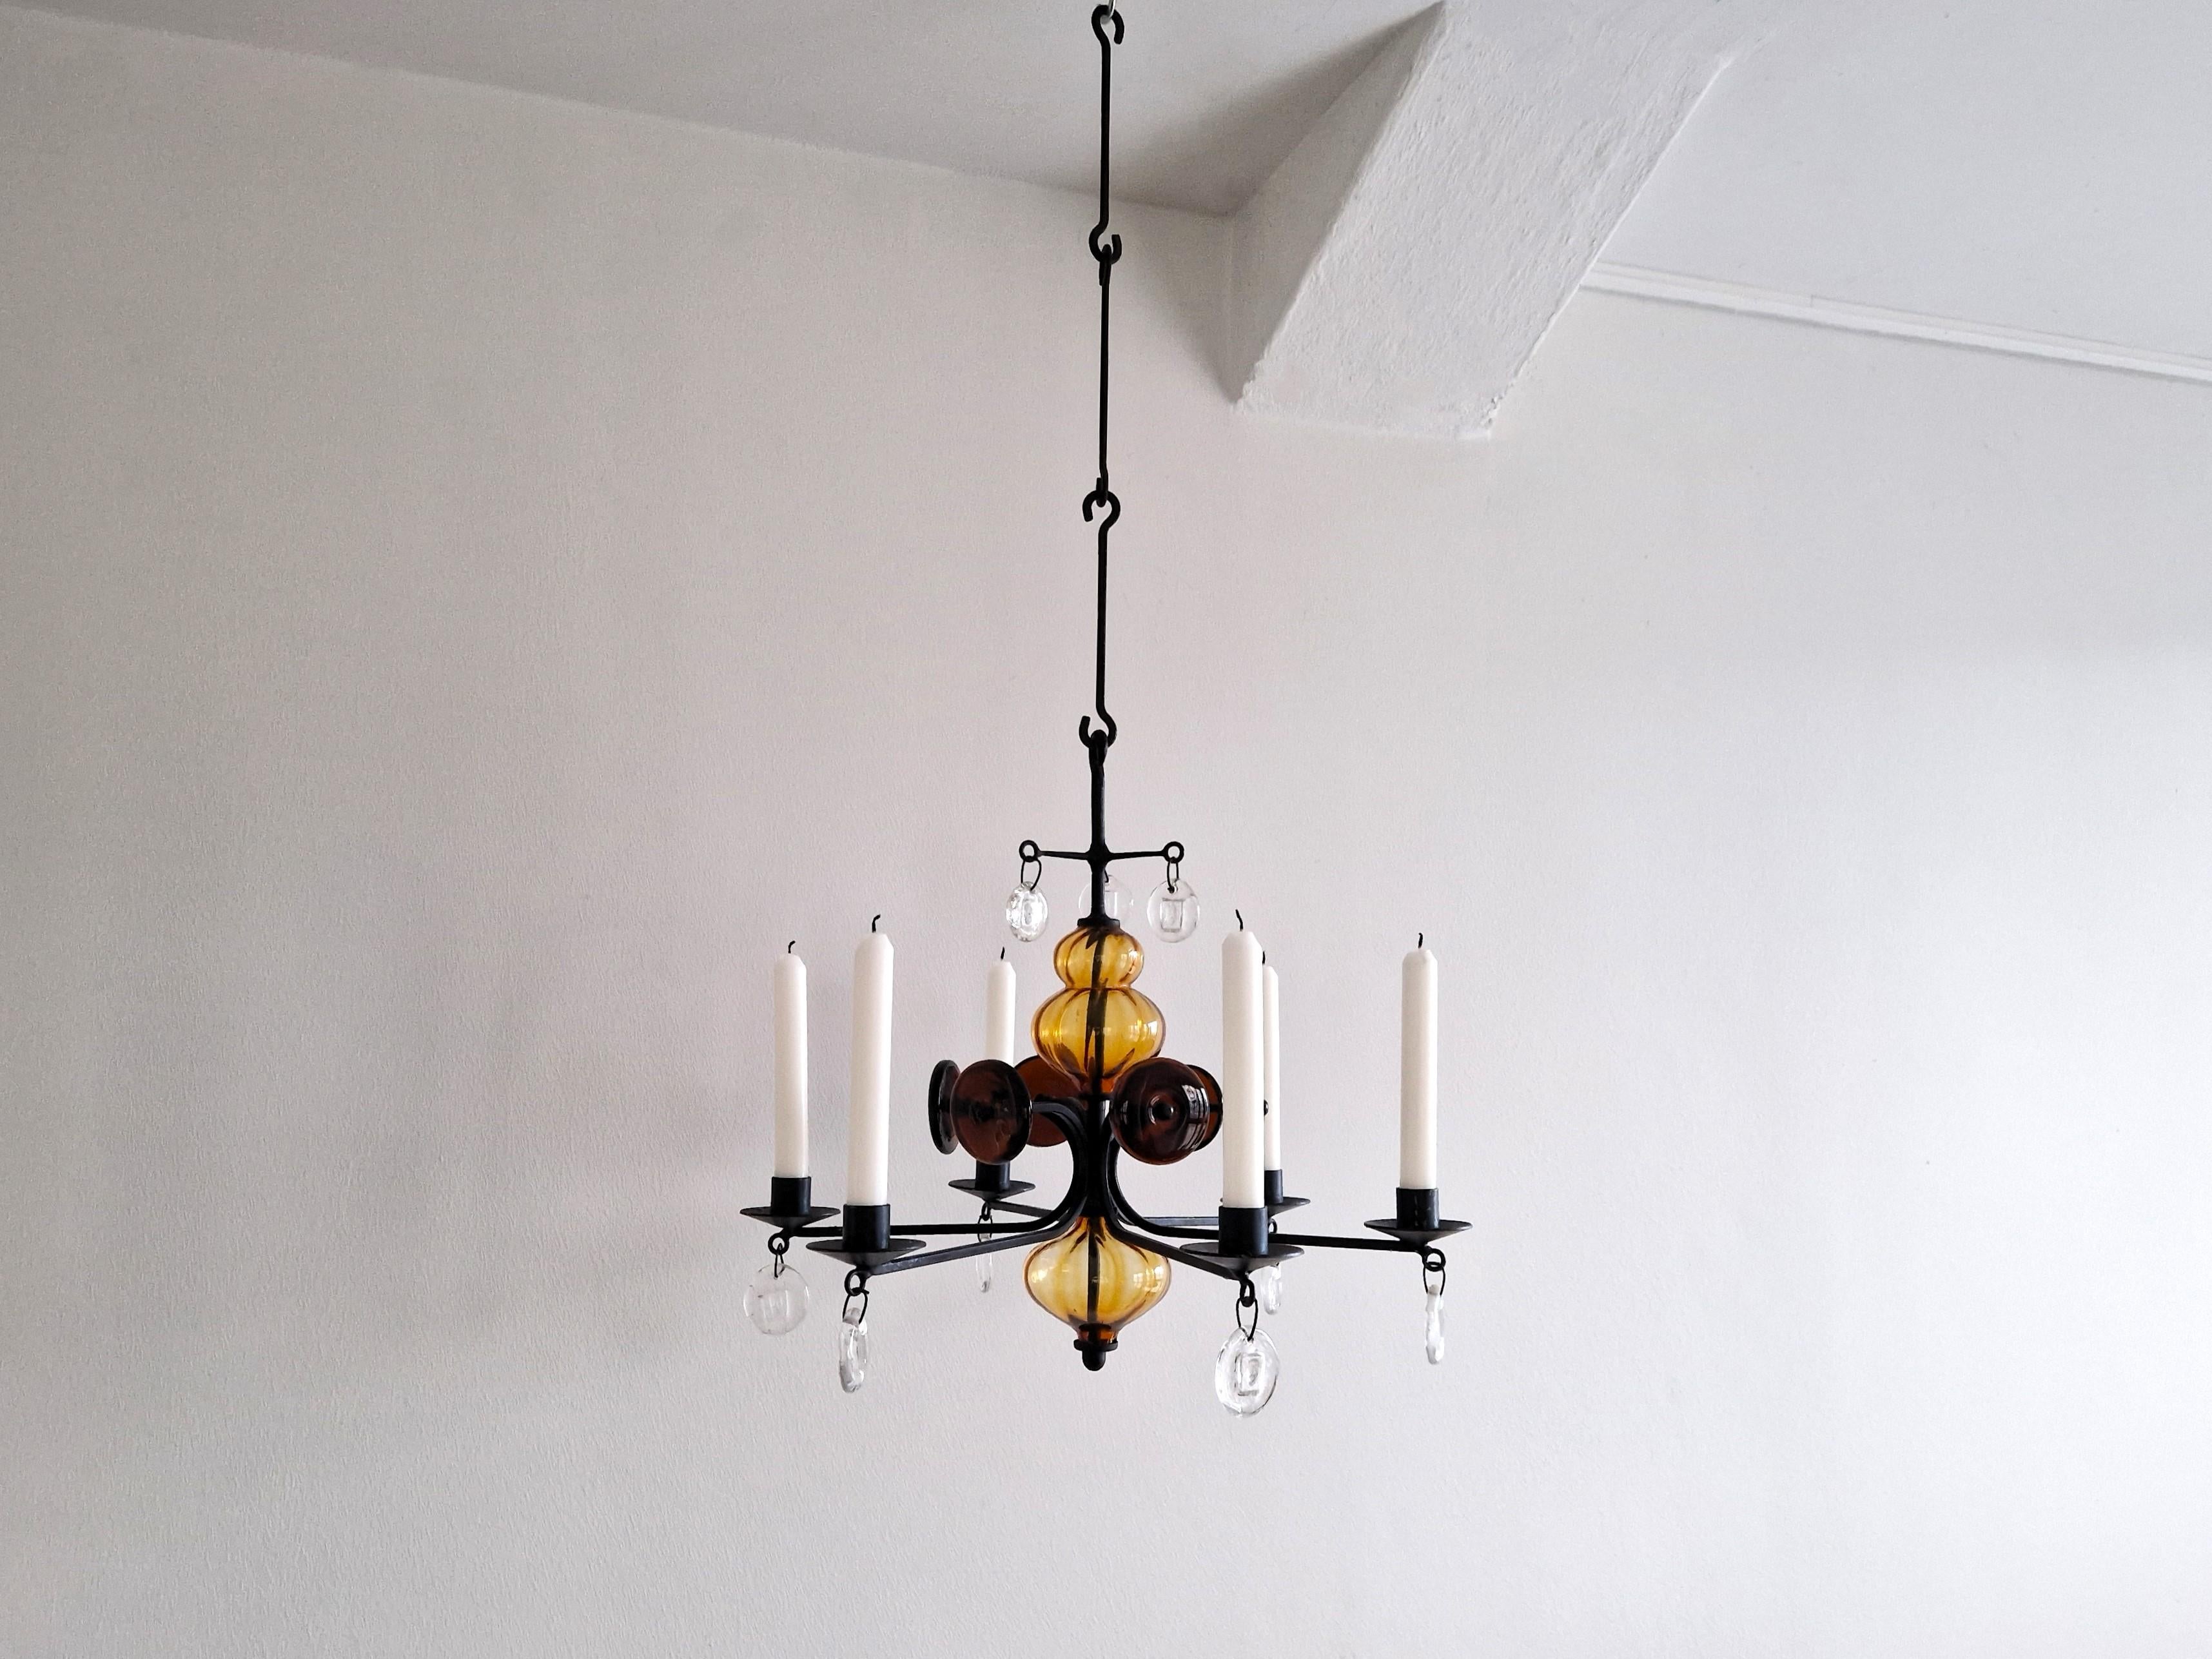 This beautiful amber and clear art glass on wrought iron candelabra chandelier was designed by Erik Höglund for Boda Glasbruk & Smide. Höglund (1932–1998) was one of the brightest stars of 20th-century Swedish glass design. This 6 arm chandelier is